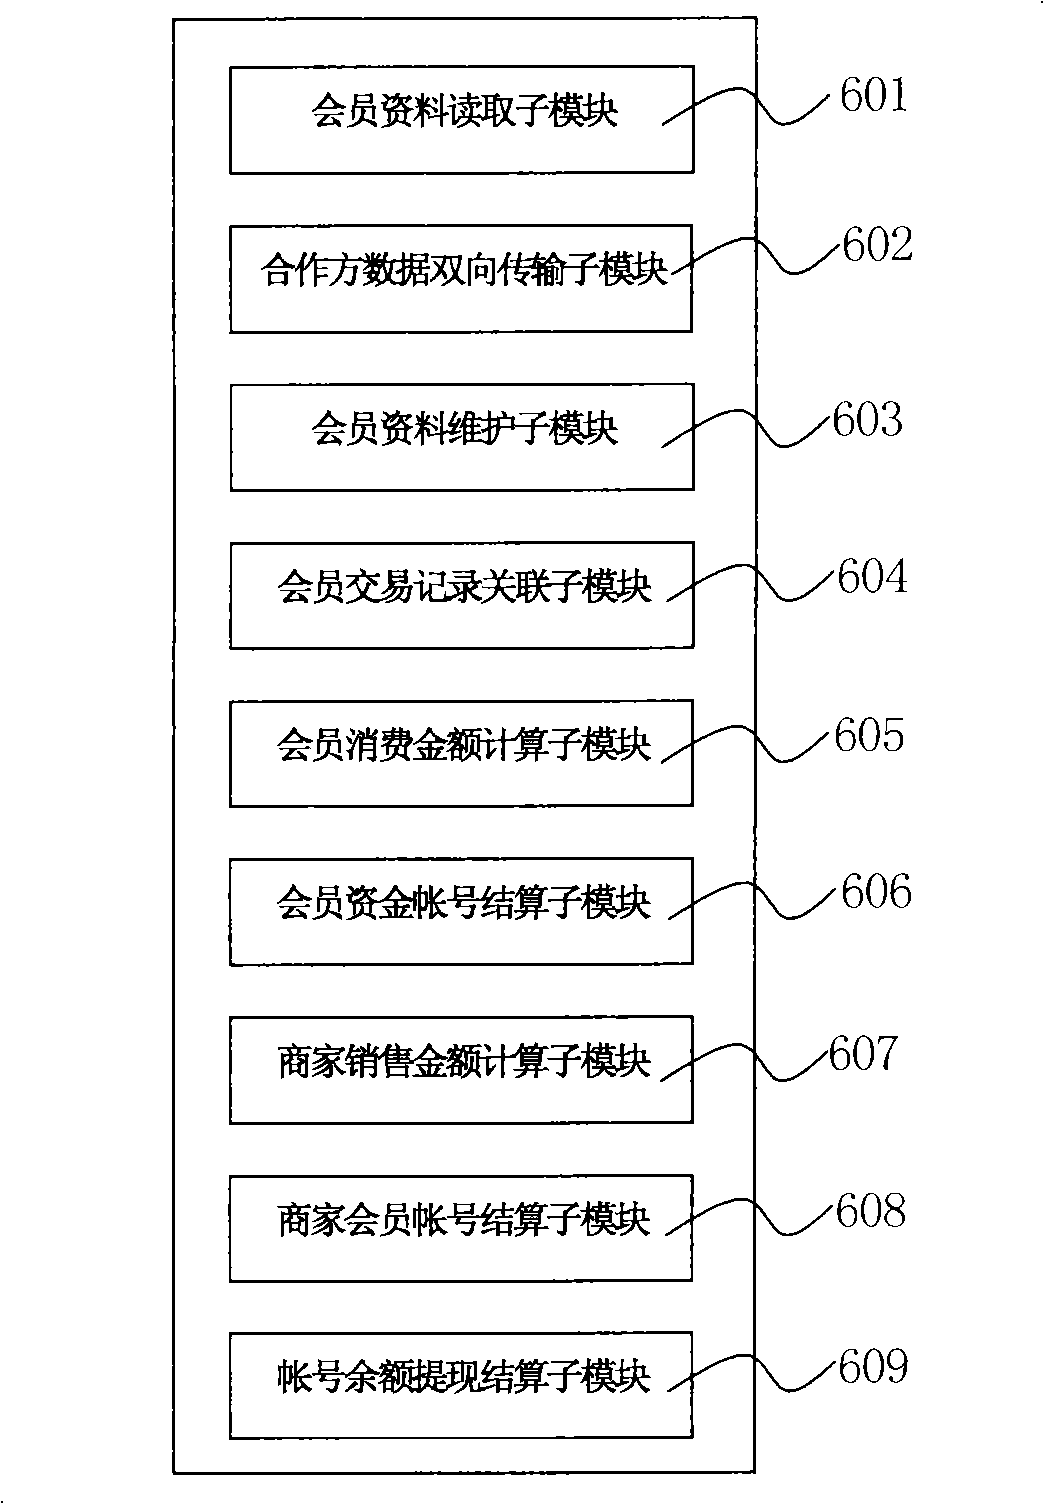 Trading stepwise affirmation payment administrative system and its payment procedure